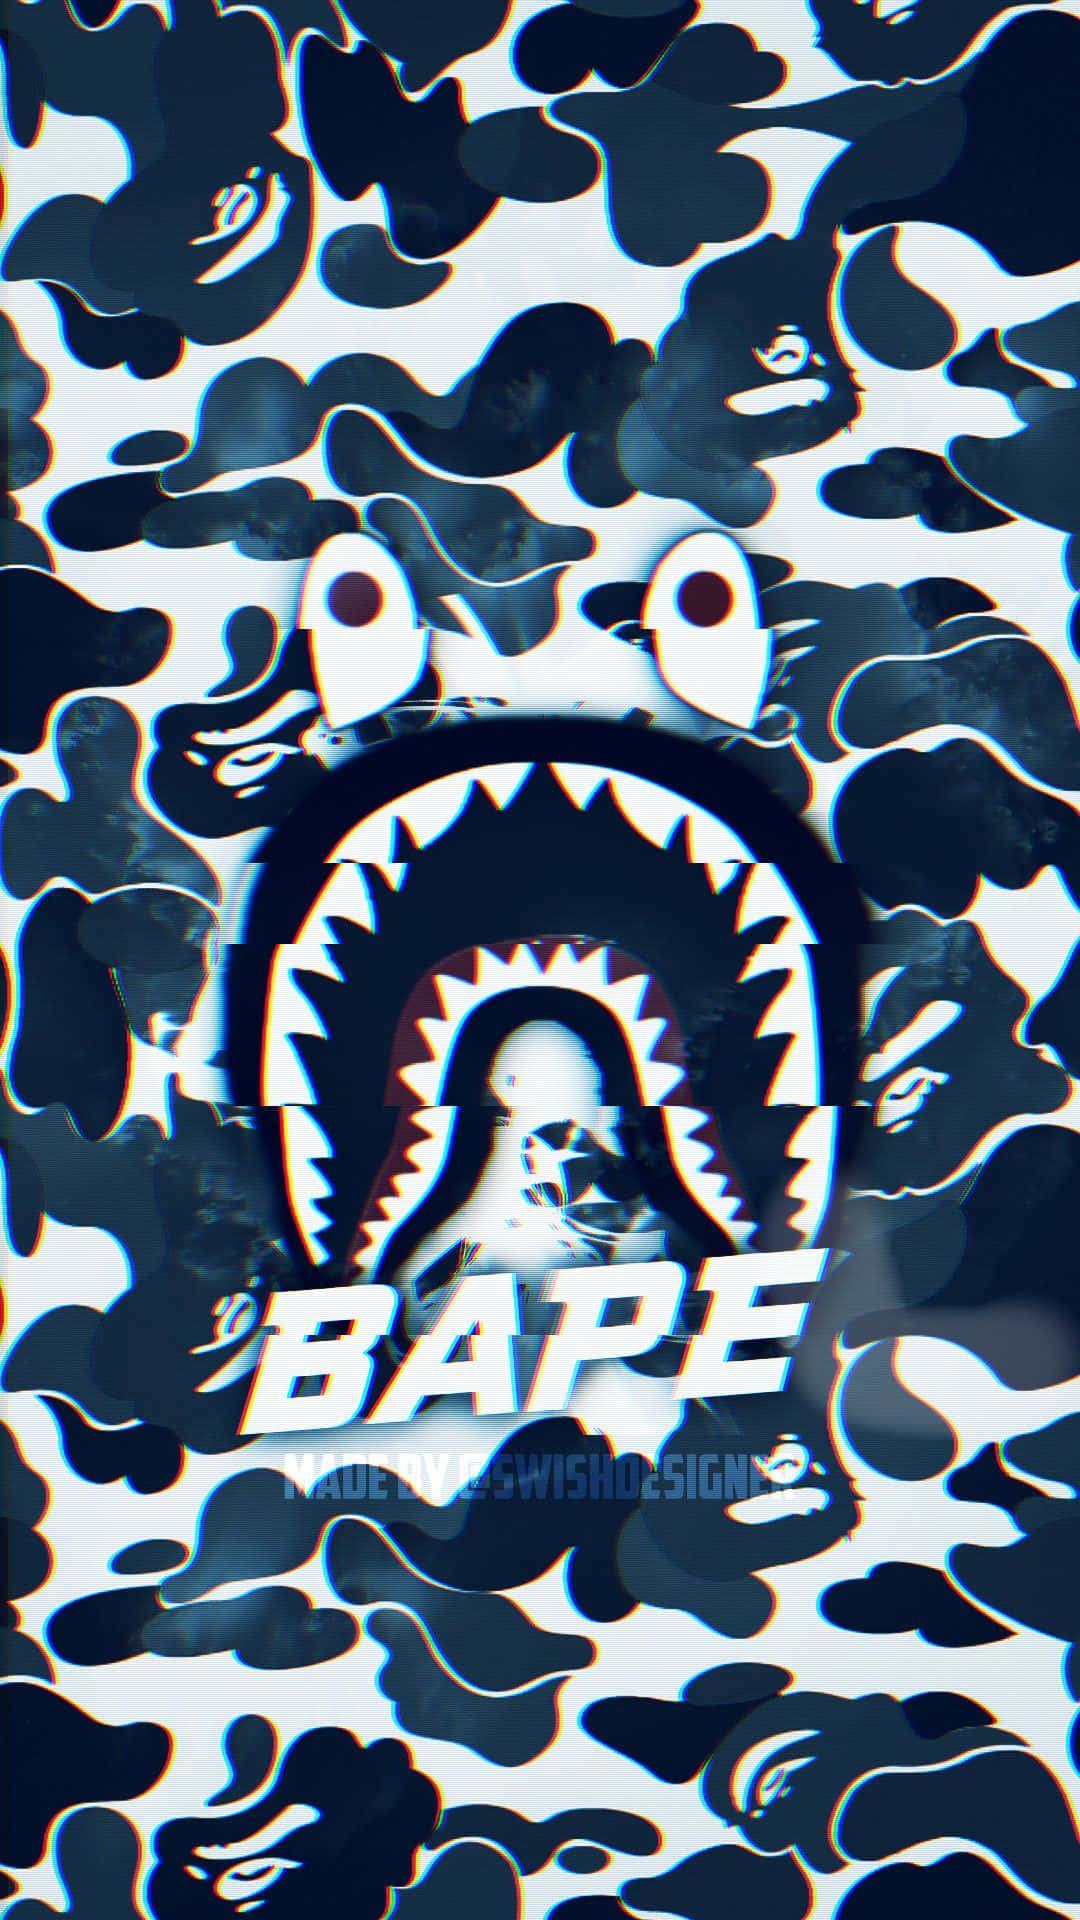 Upgrade your device with a BAPE iPhone Wallpaper